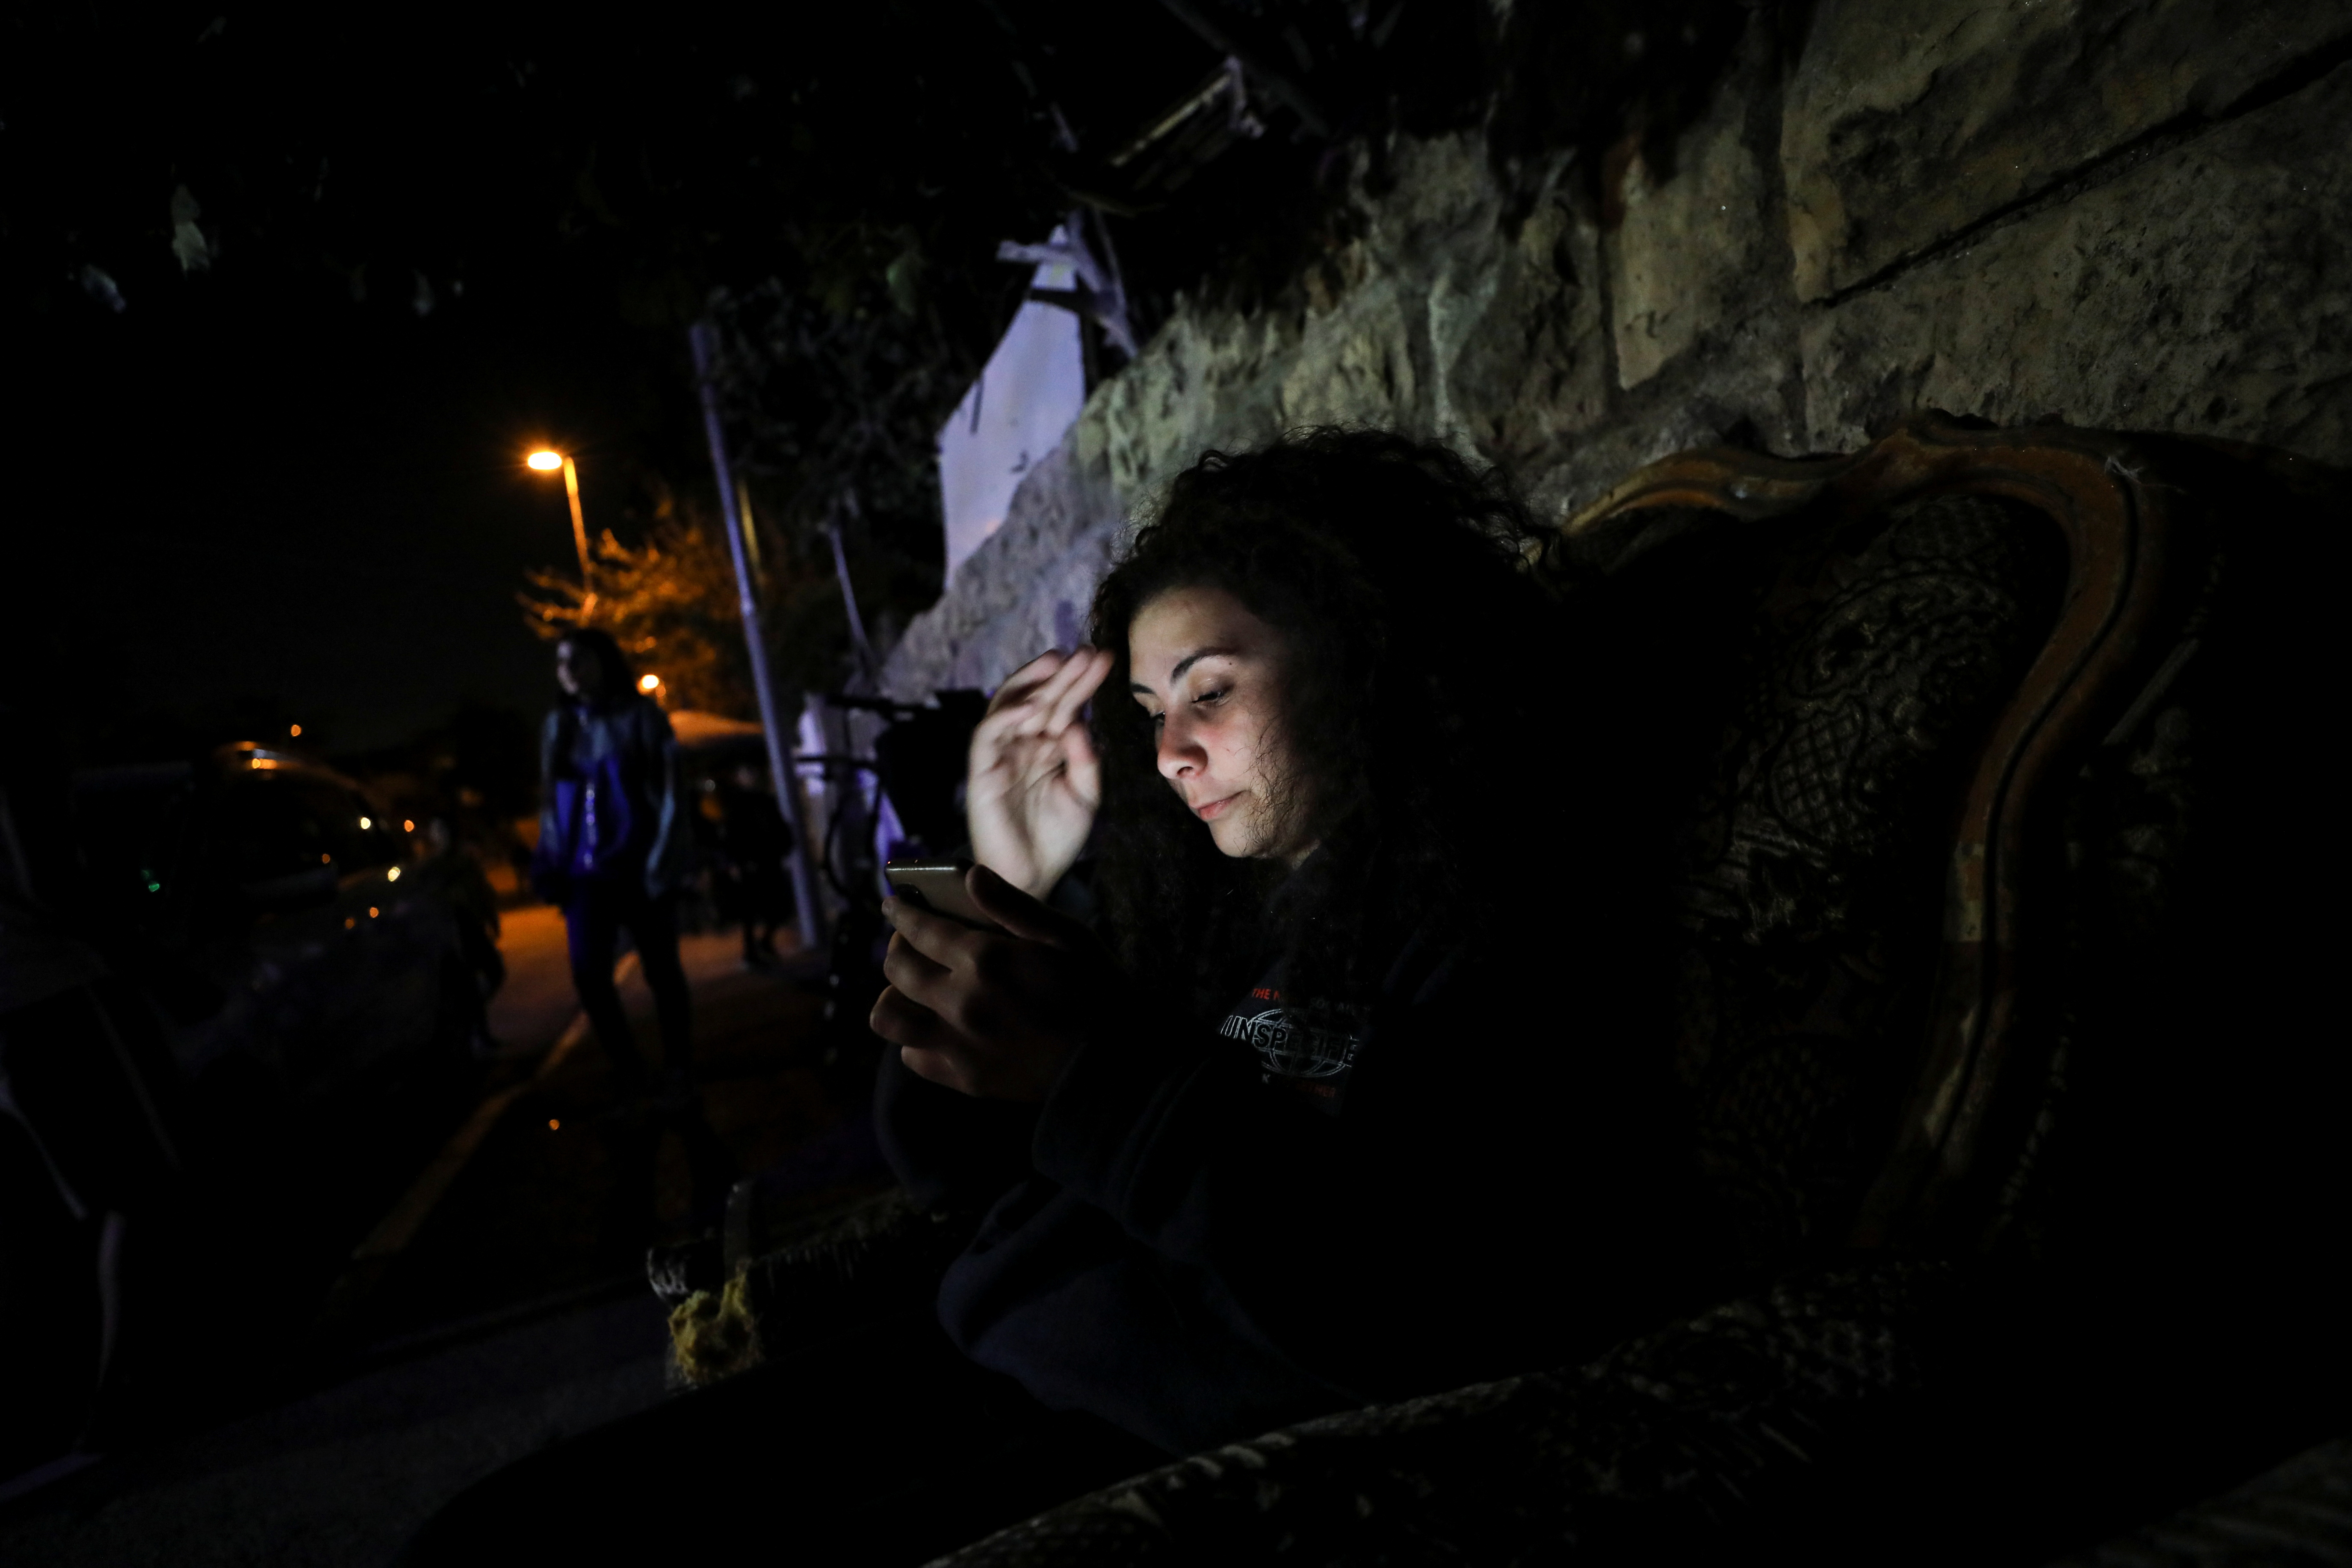 Tala, a member of the Abu Diab family, Palestinian residents of Sheikh Jarrah, uses her phone in her neighbourhood in East Jerusalem